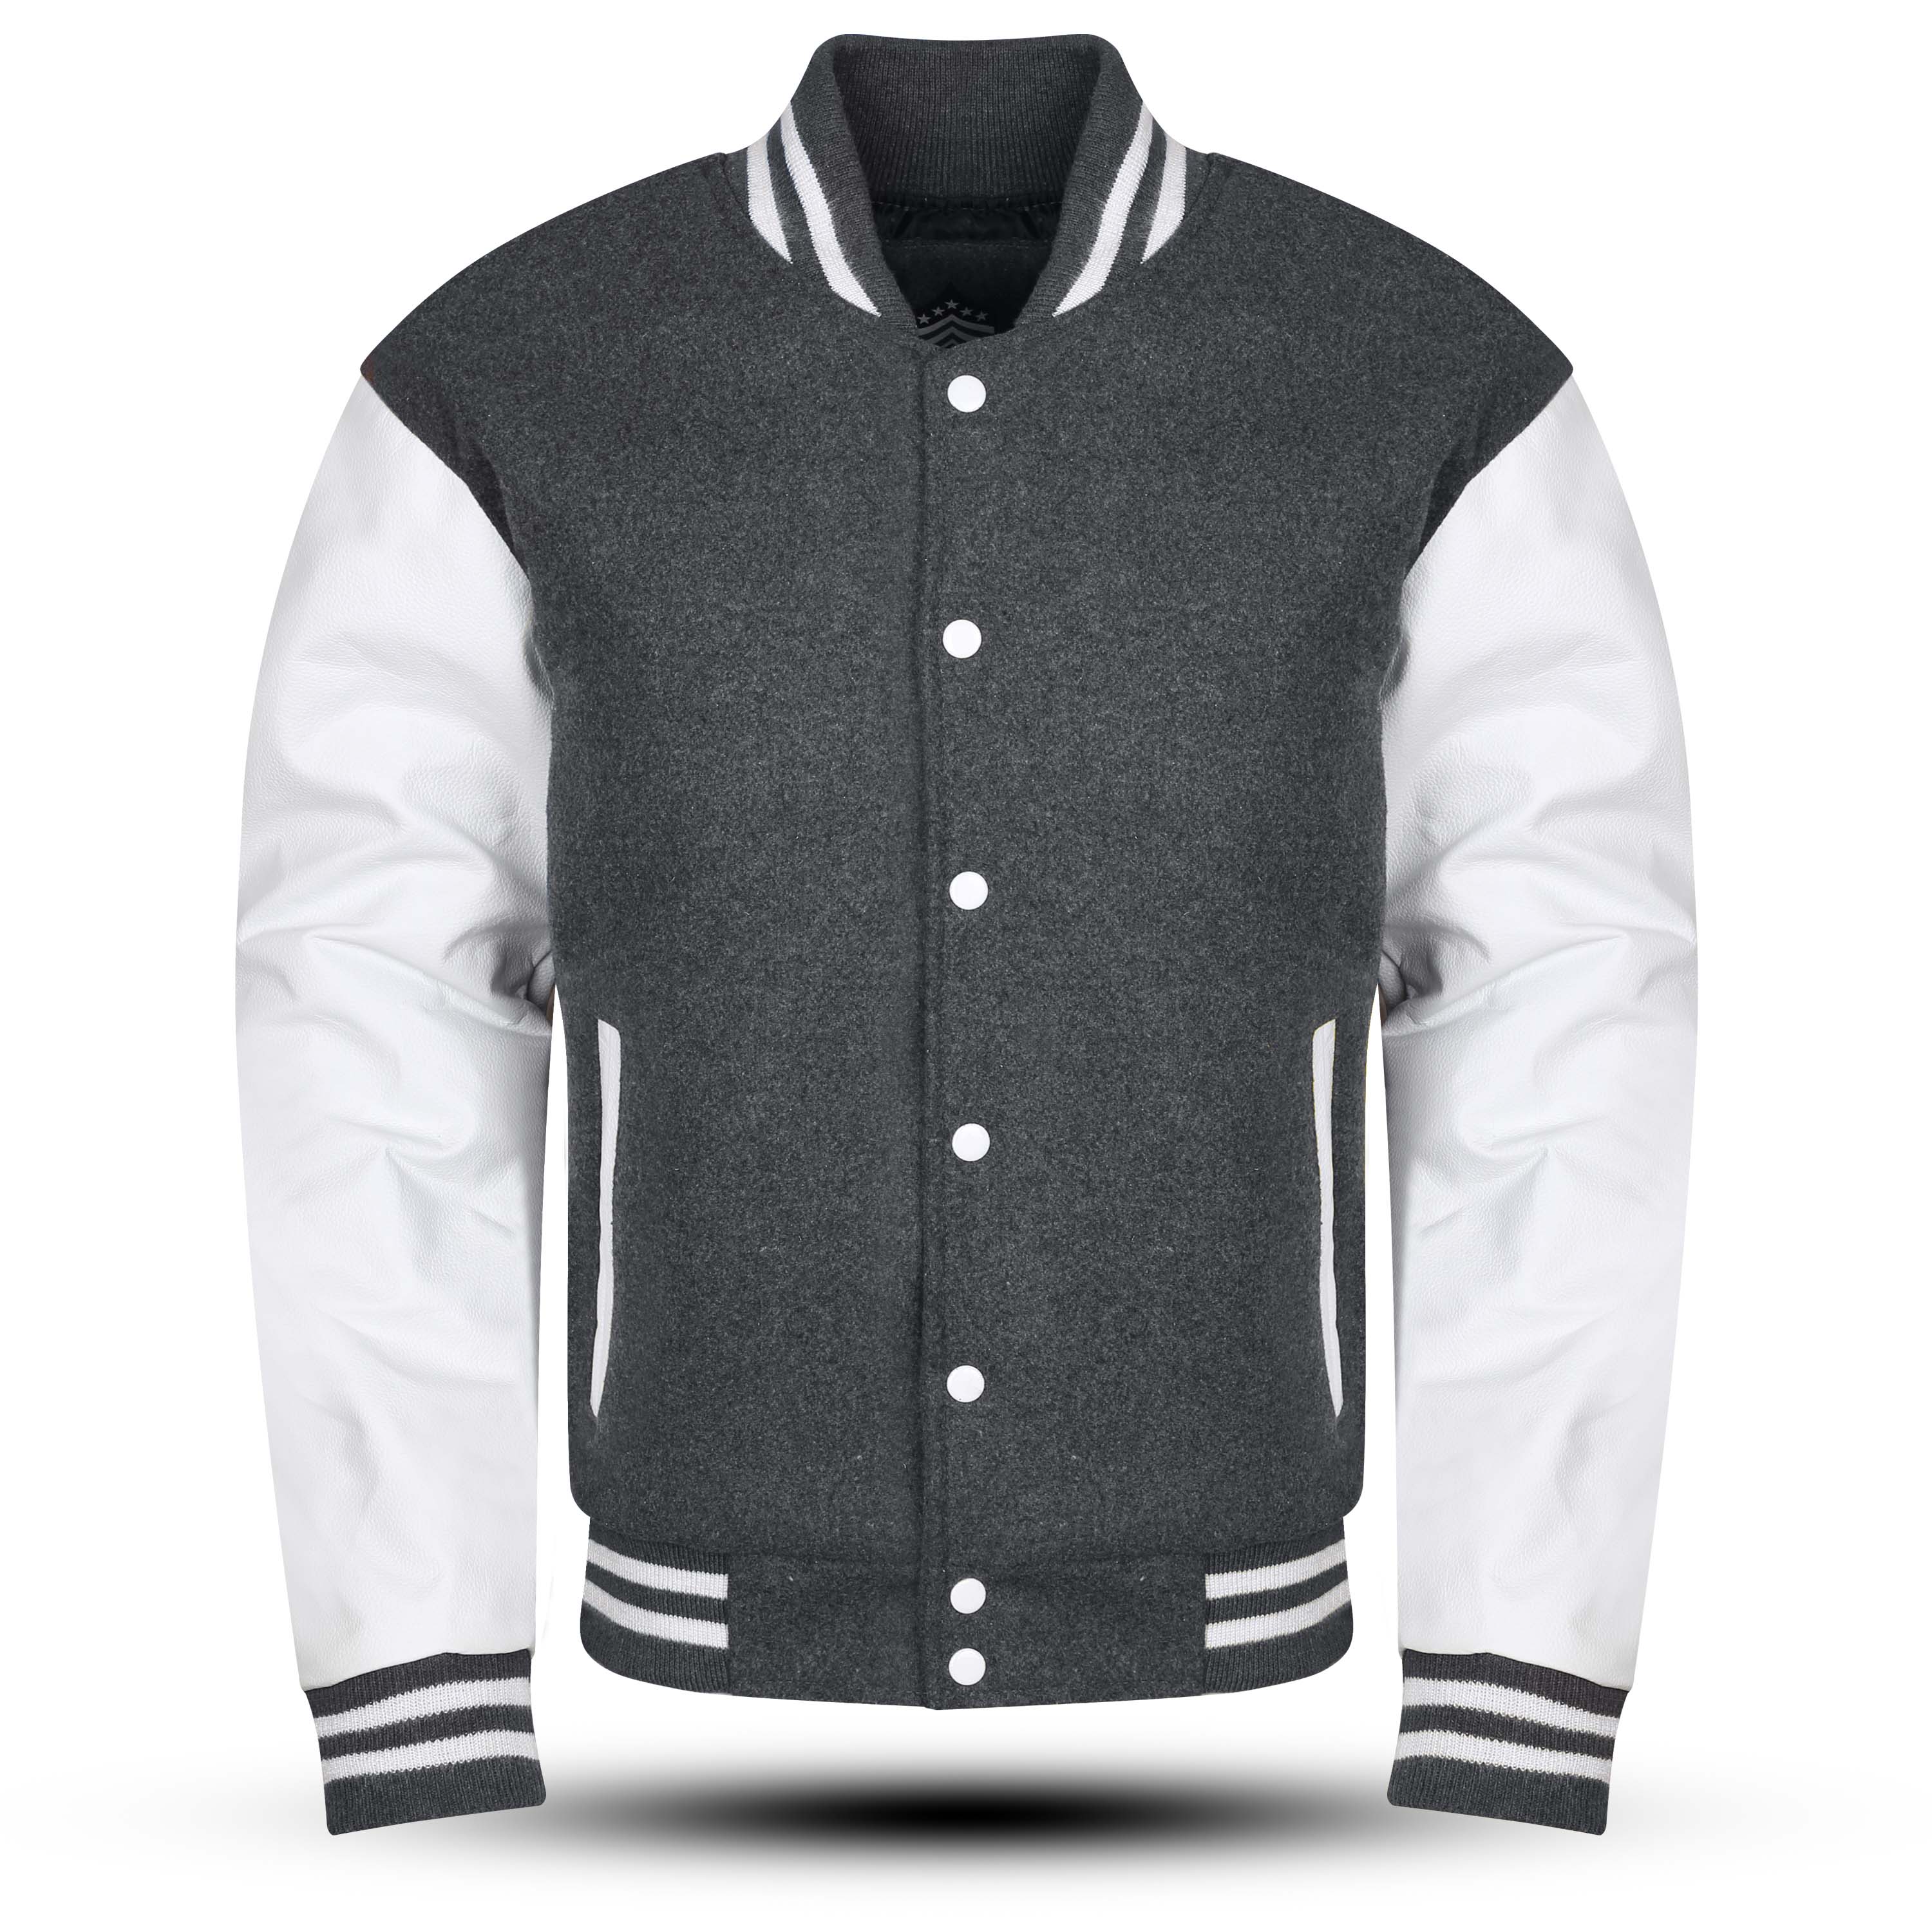 Varsity Jacket with Gray Wool Body and White Leather Sleeves Letterman ...